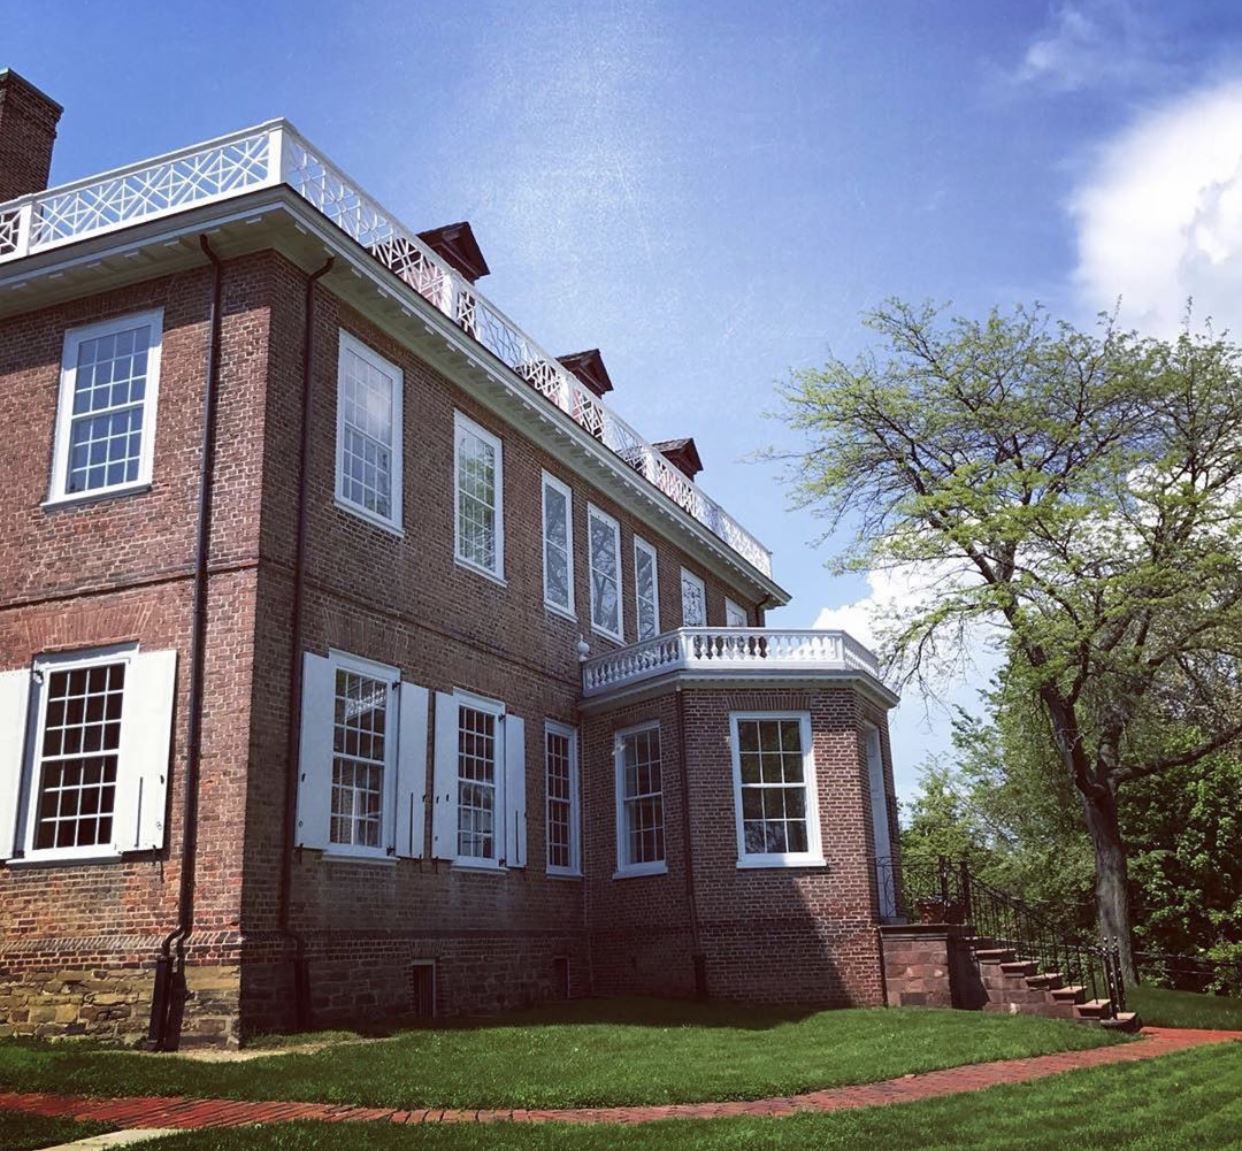 the Schuyler Mansion State Historic Site! Home to Philip J. Schuyler, a Revolutionary War general, and his wife Catharine Van Rensselaer where they raised their eight children, this site is a must-see for Hamilton fans. Alexander Hamilton proposed to and married Elizabeth Schuyler here in 1870.